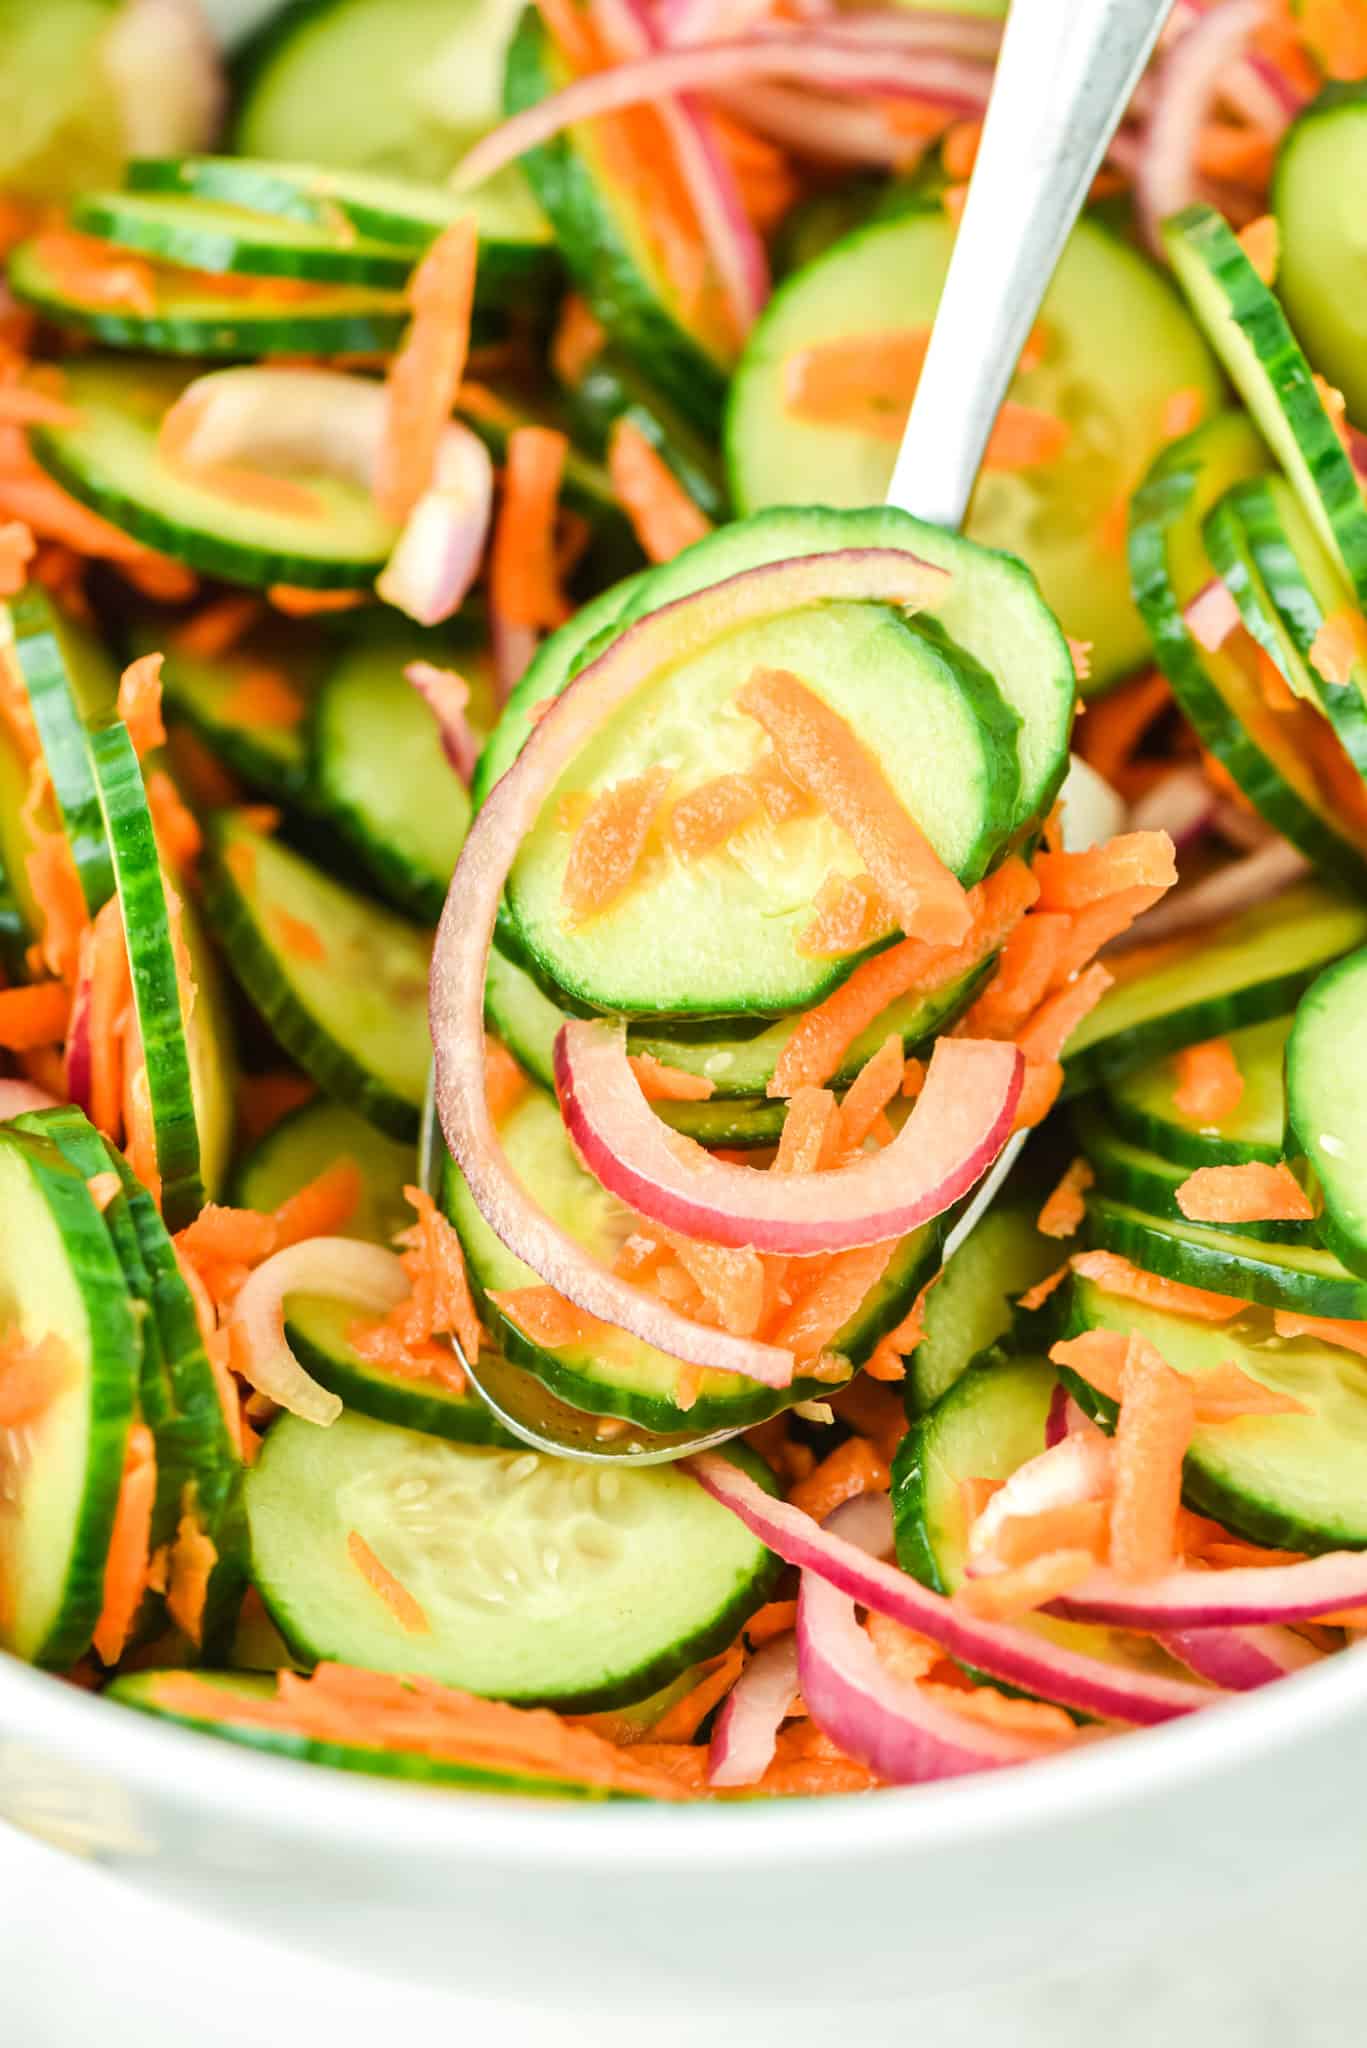 A forkful of cucumber carrot salad over the serving bowl.